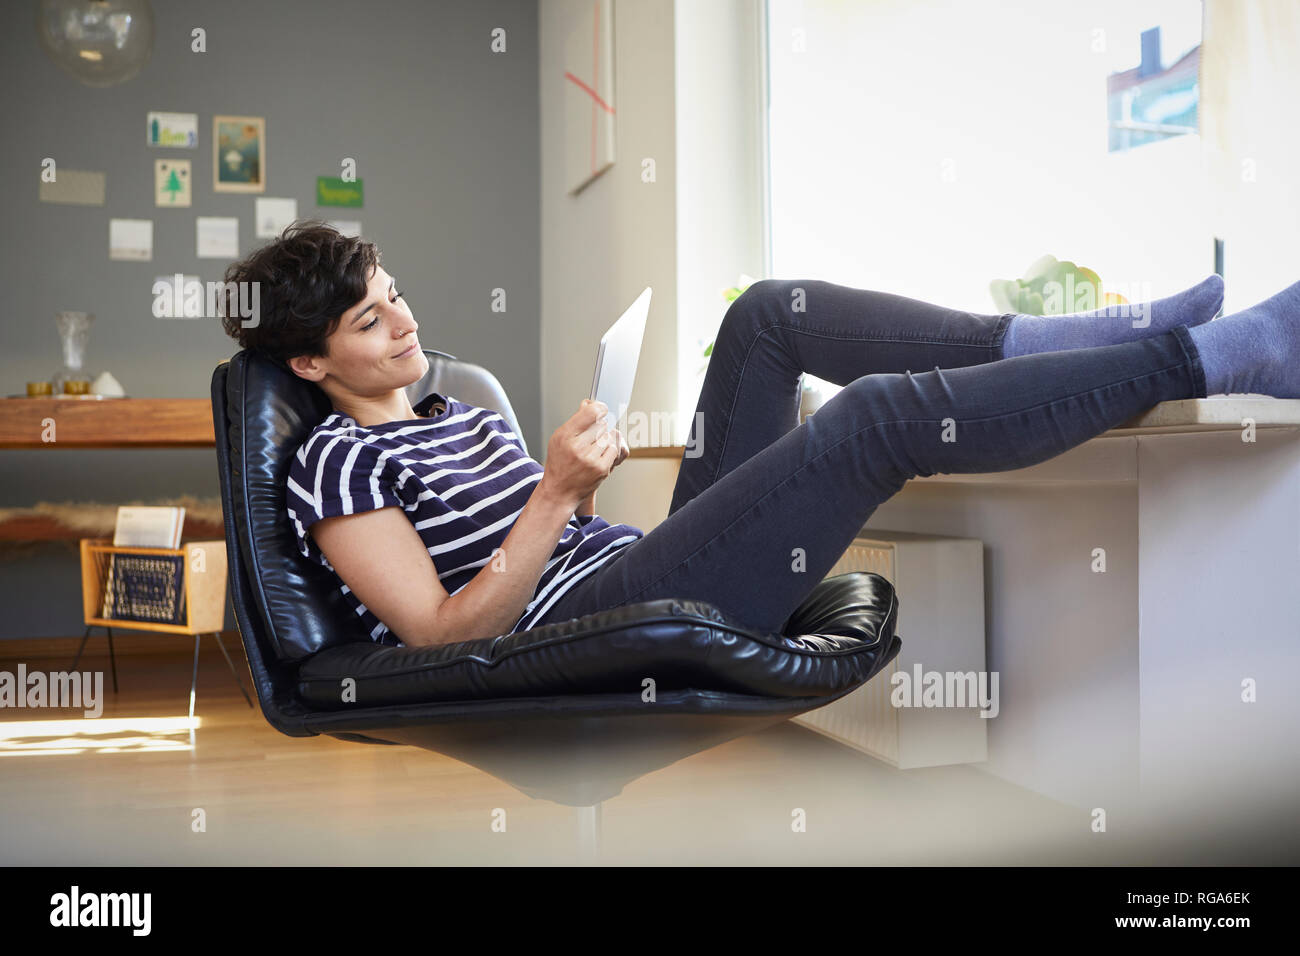 Relaxed woman using tablet at home Banque D'Images